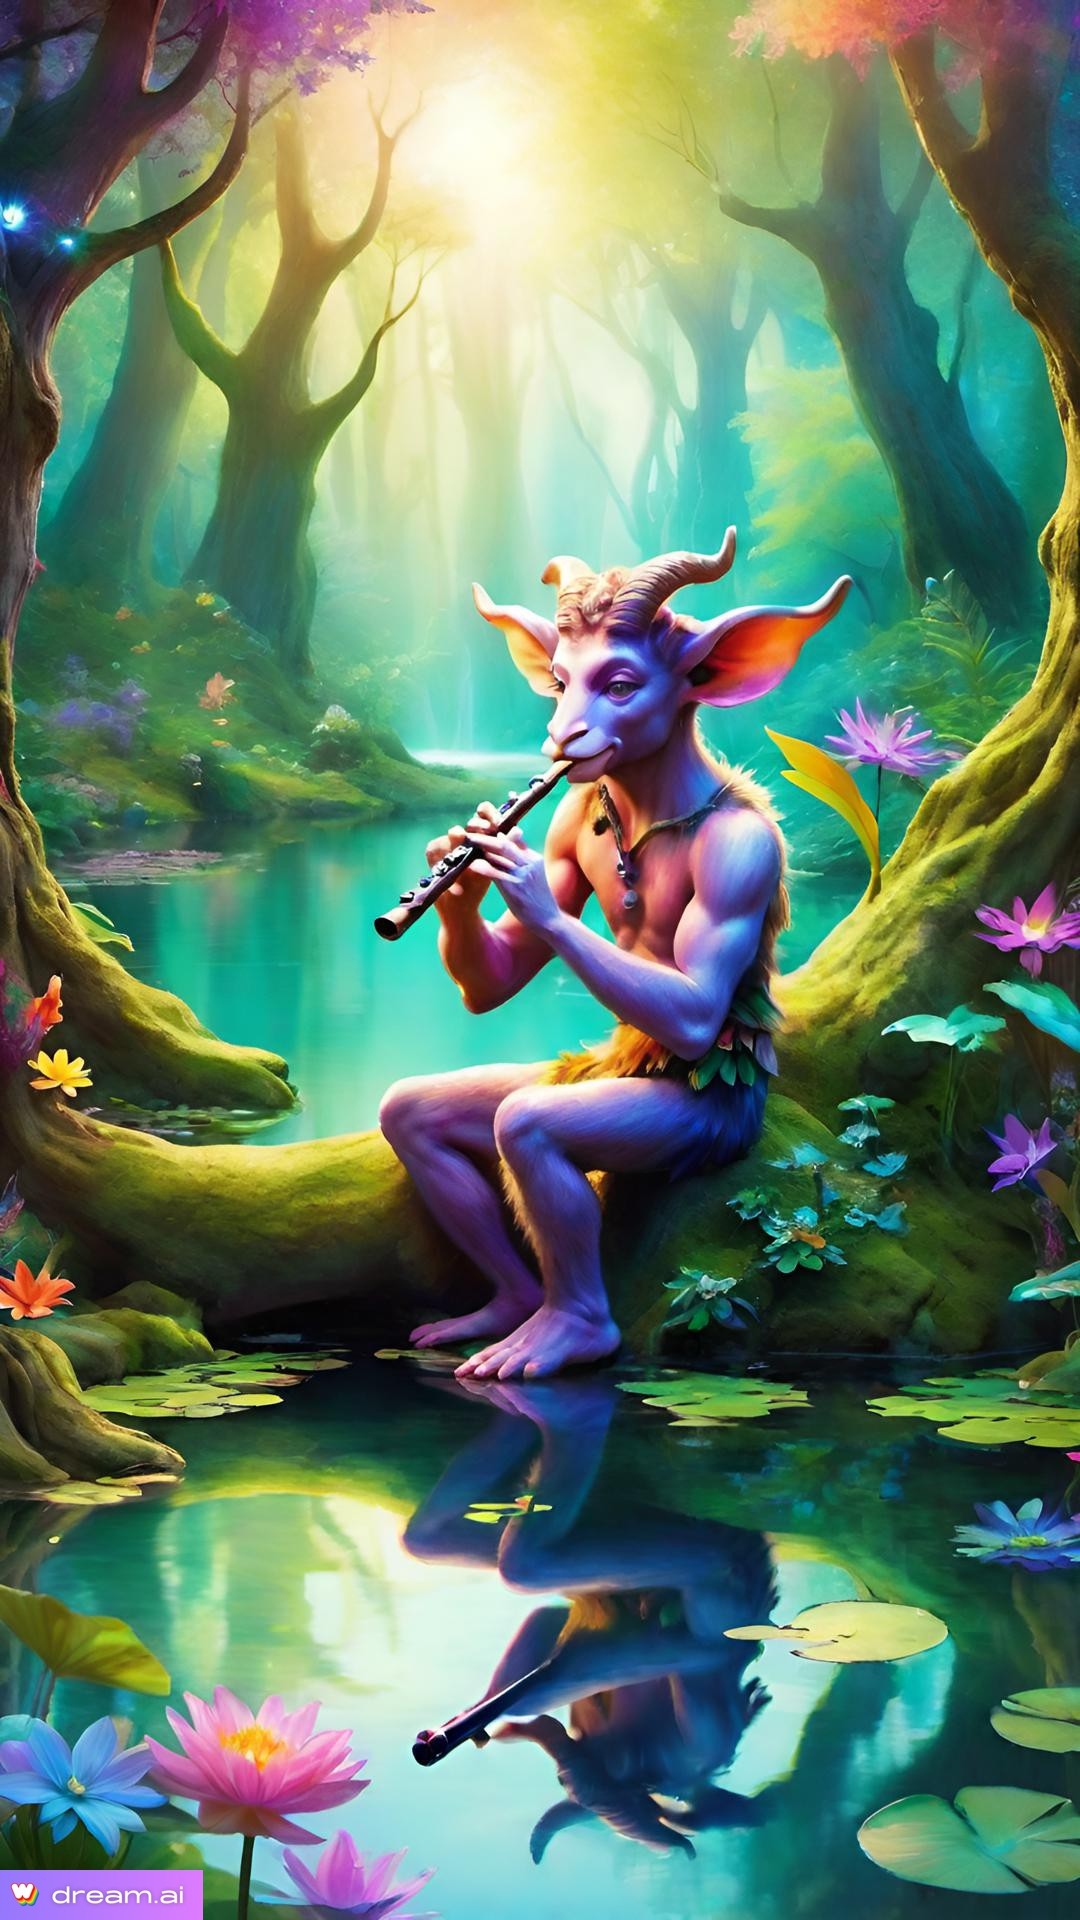 a cartoon character playing a flute in a forest